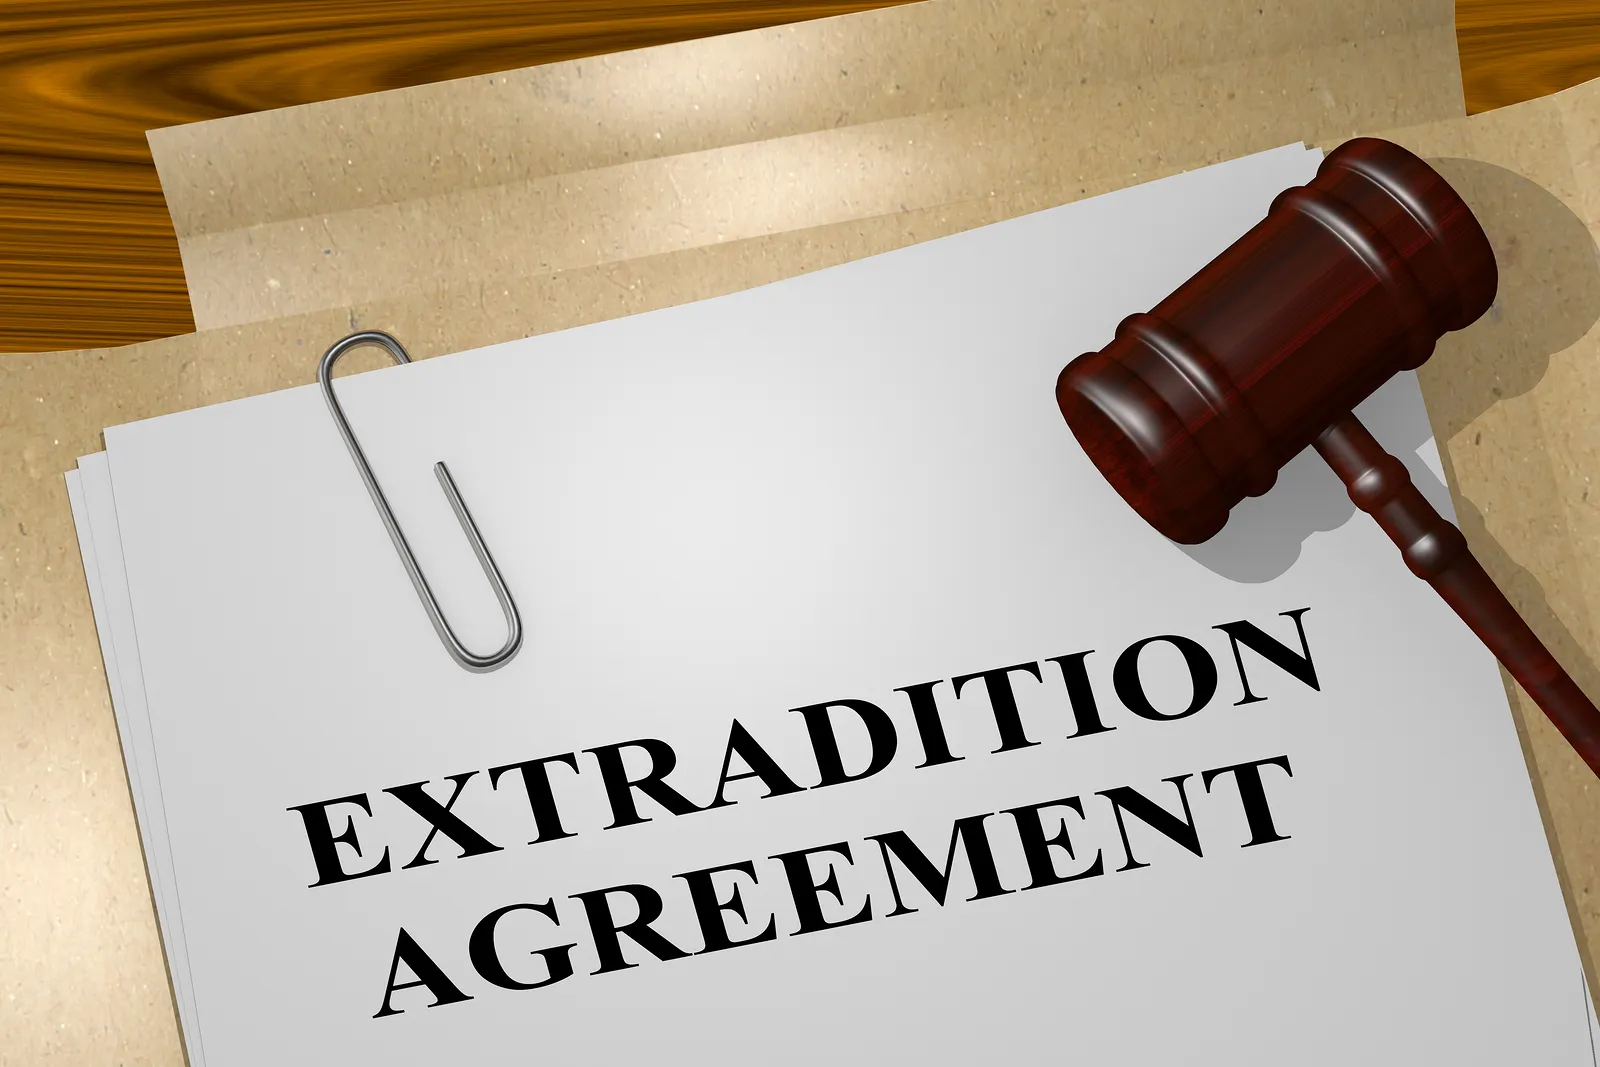 Draft Law on Extradition